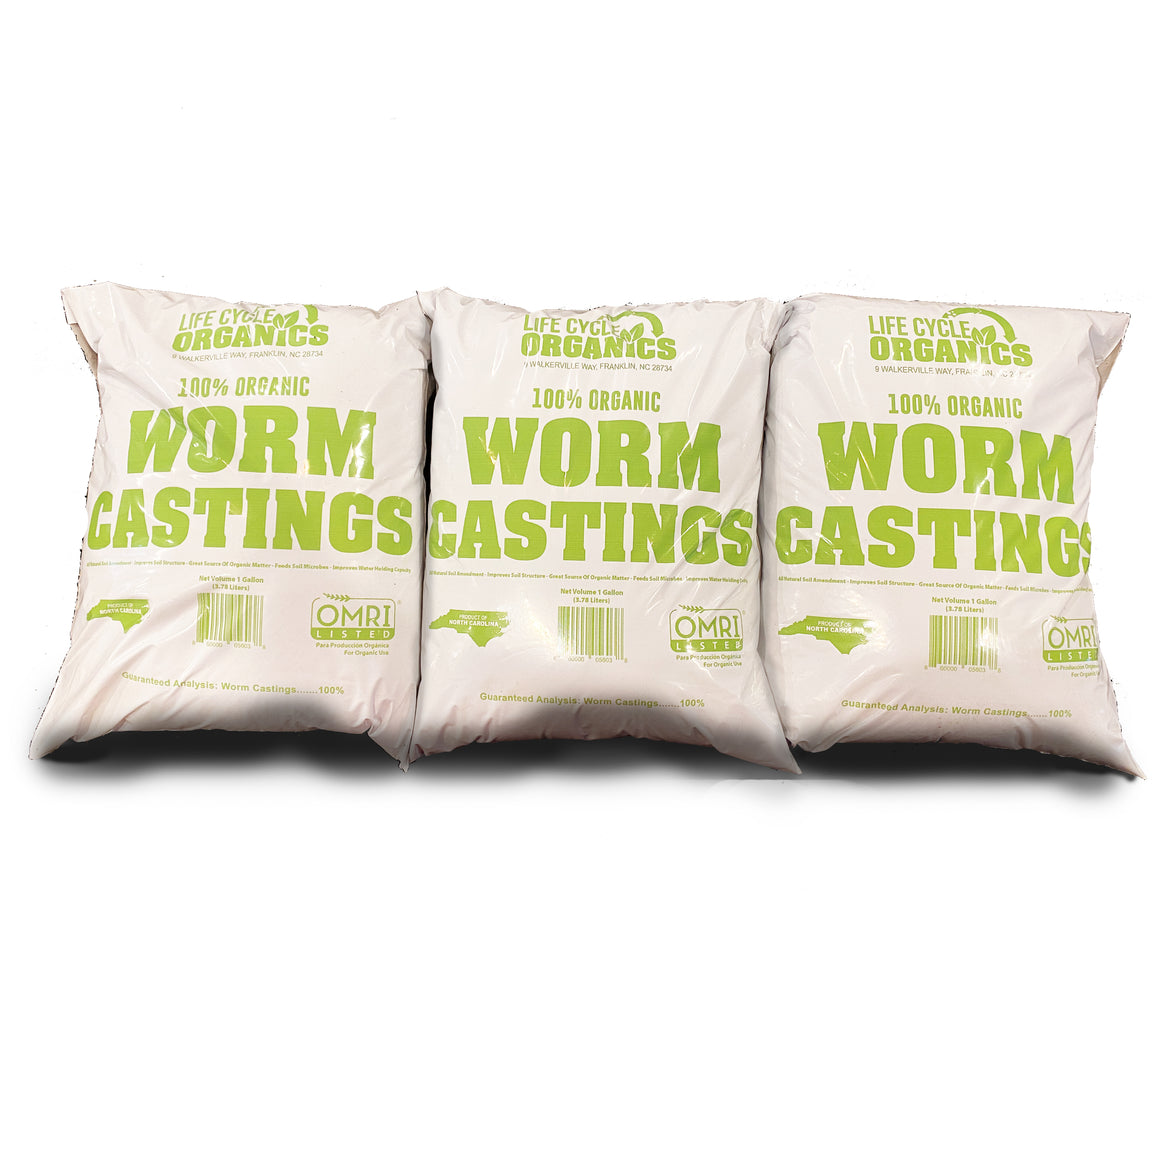 3 Pack of Life Cycle Organics 1 Gallon Worm Castings